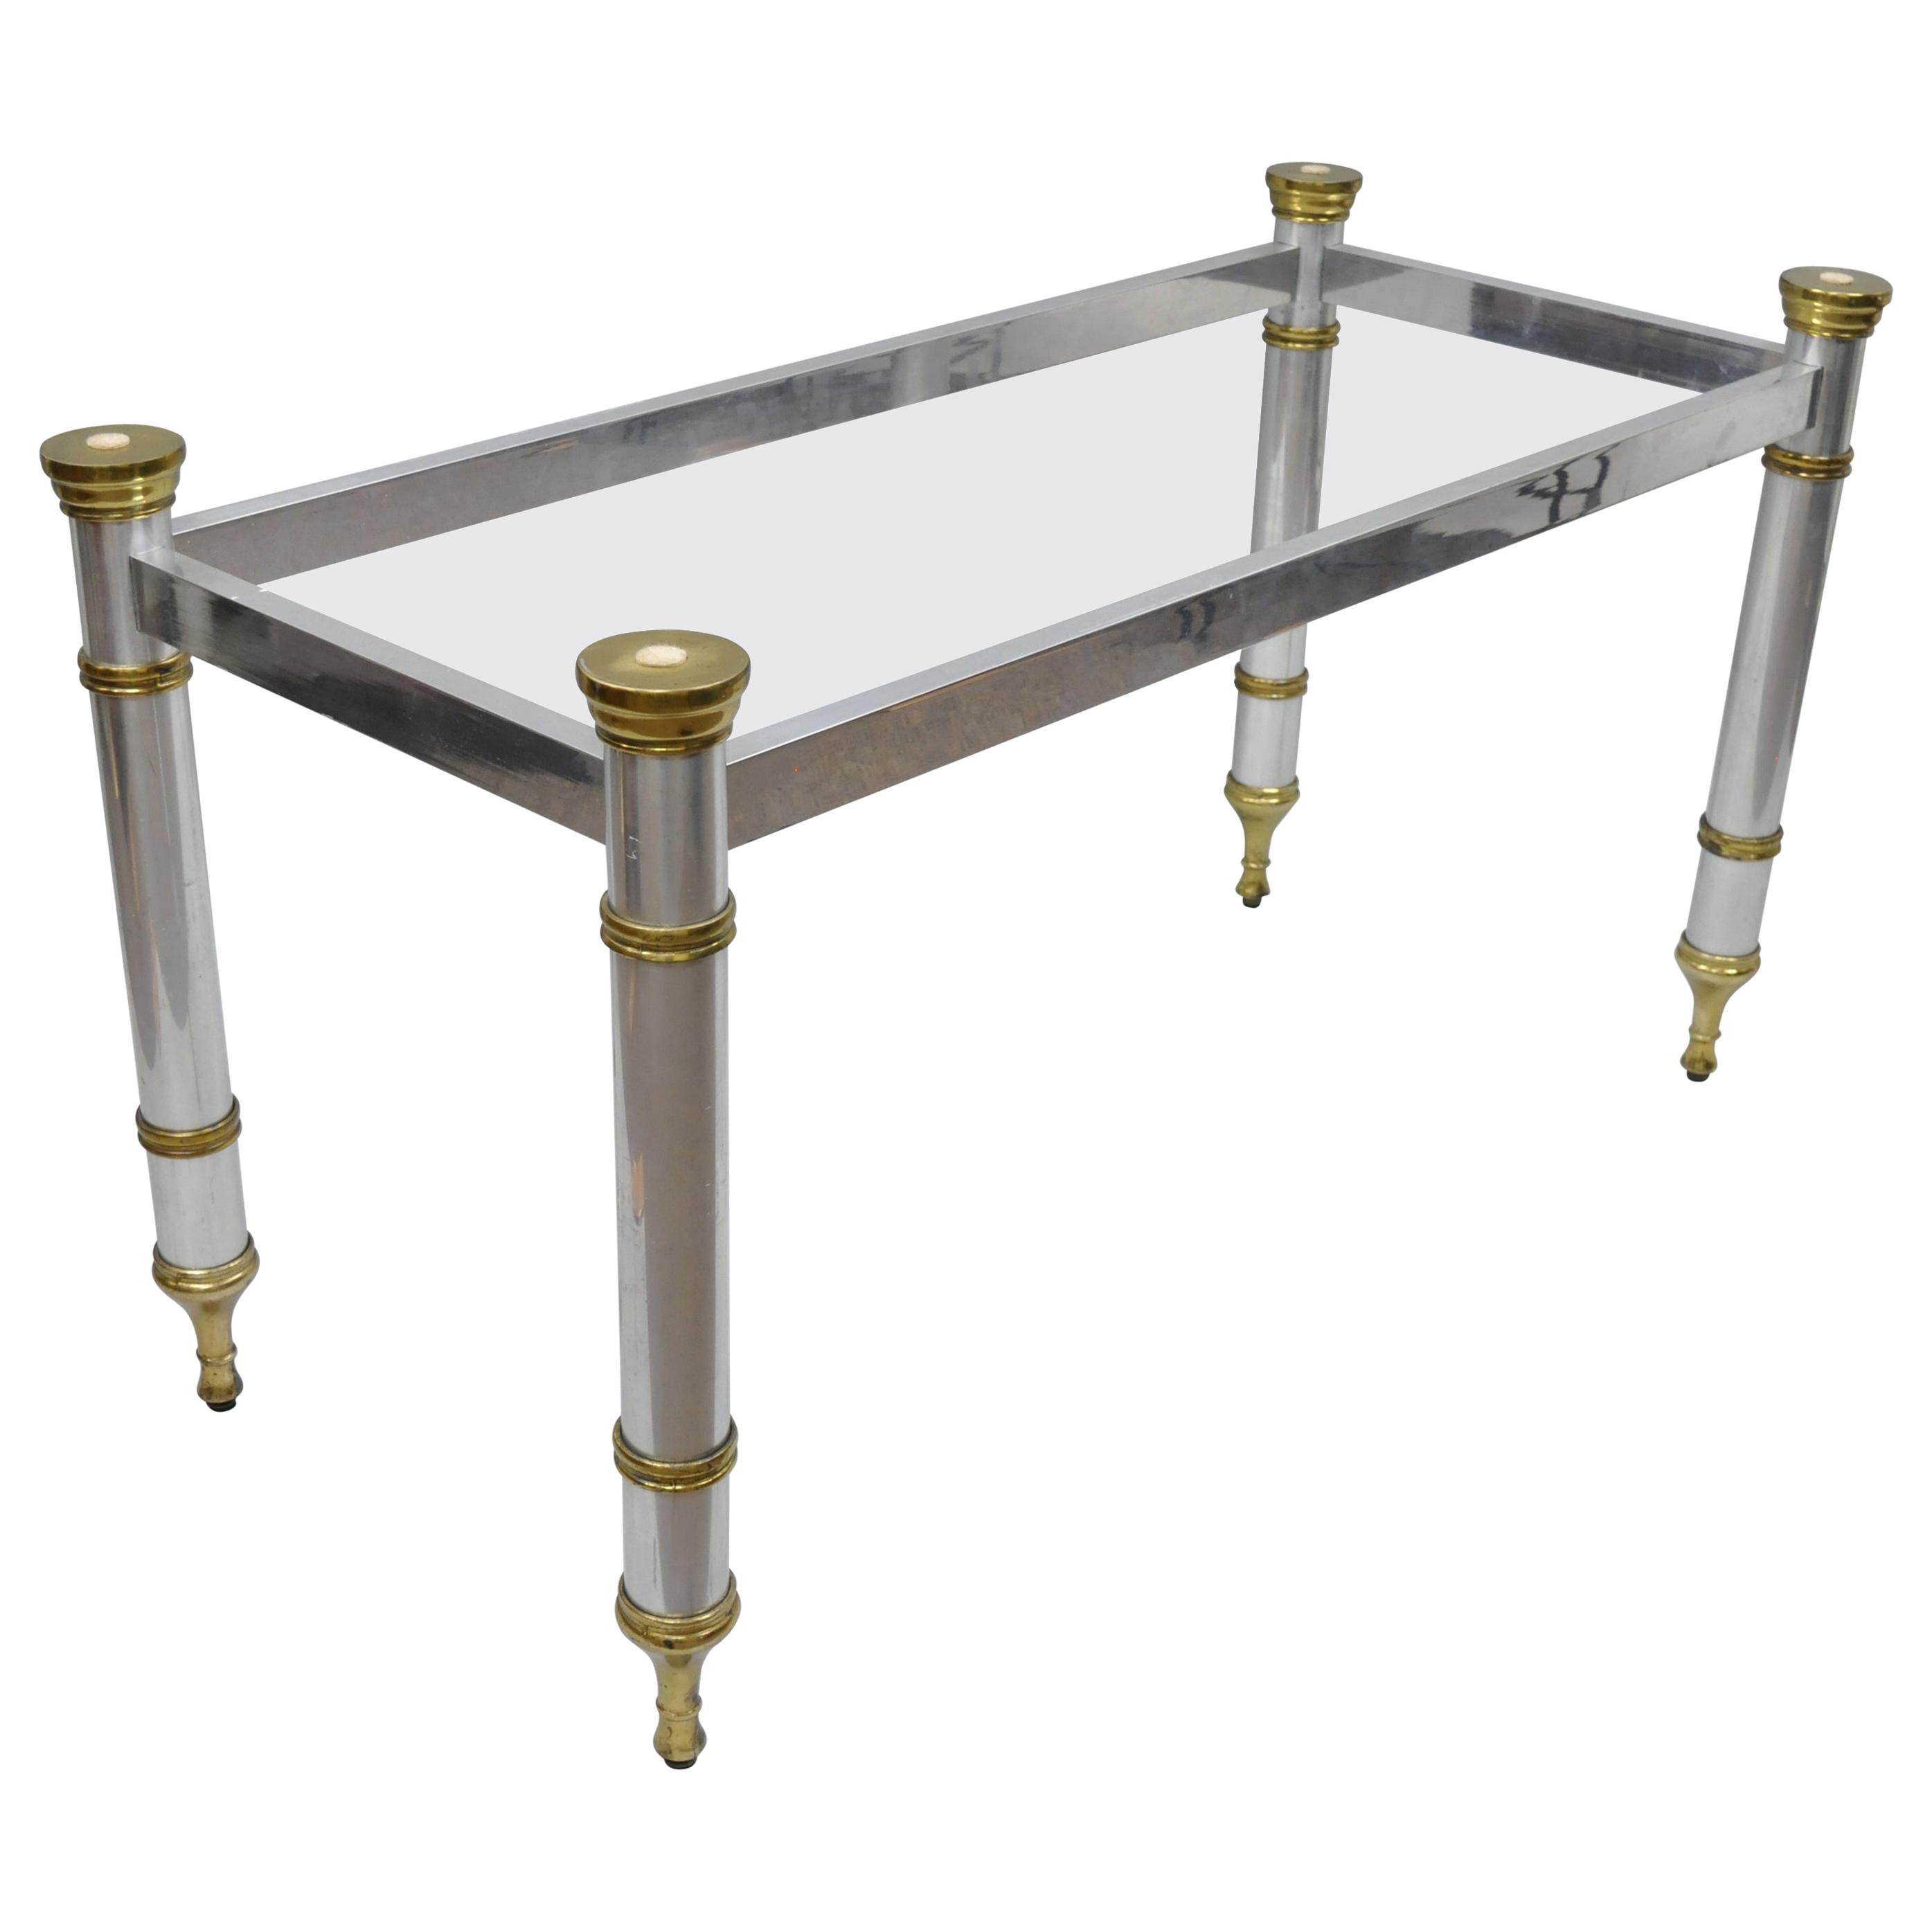 Chrome and Brass Maison Jansen Hollywood Regency Console Dining Desk Table Base